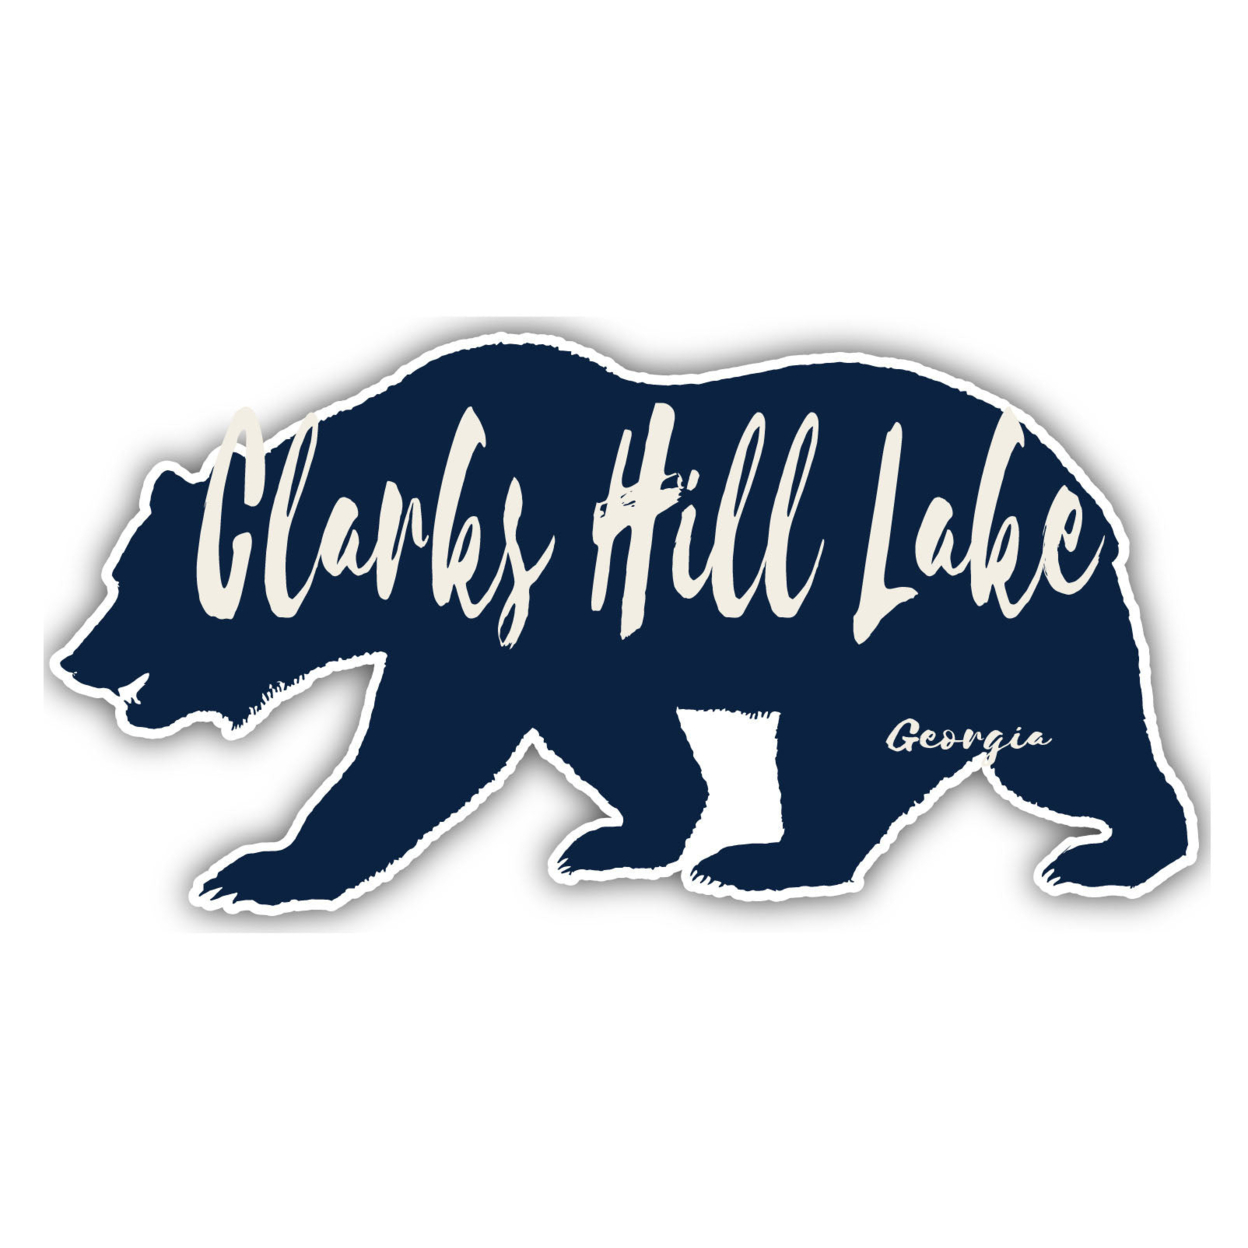 Clarks Hill Lake Georgia Souvenir Decorative Stickers (Choose Theme And Size) - 4-Pack, 10-Inch, Camp Life